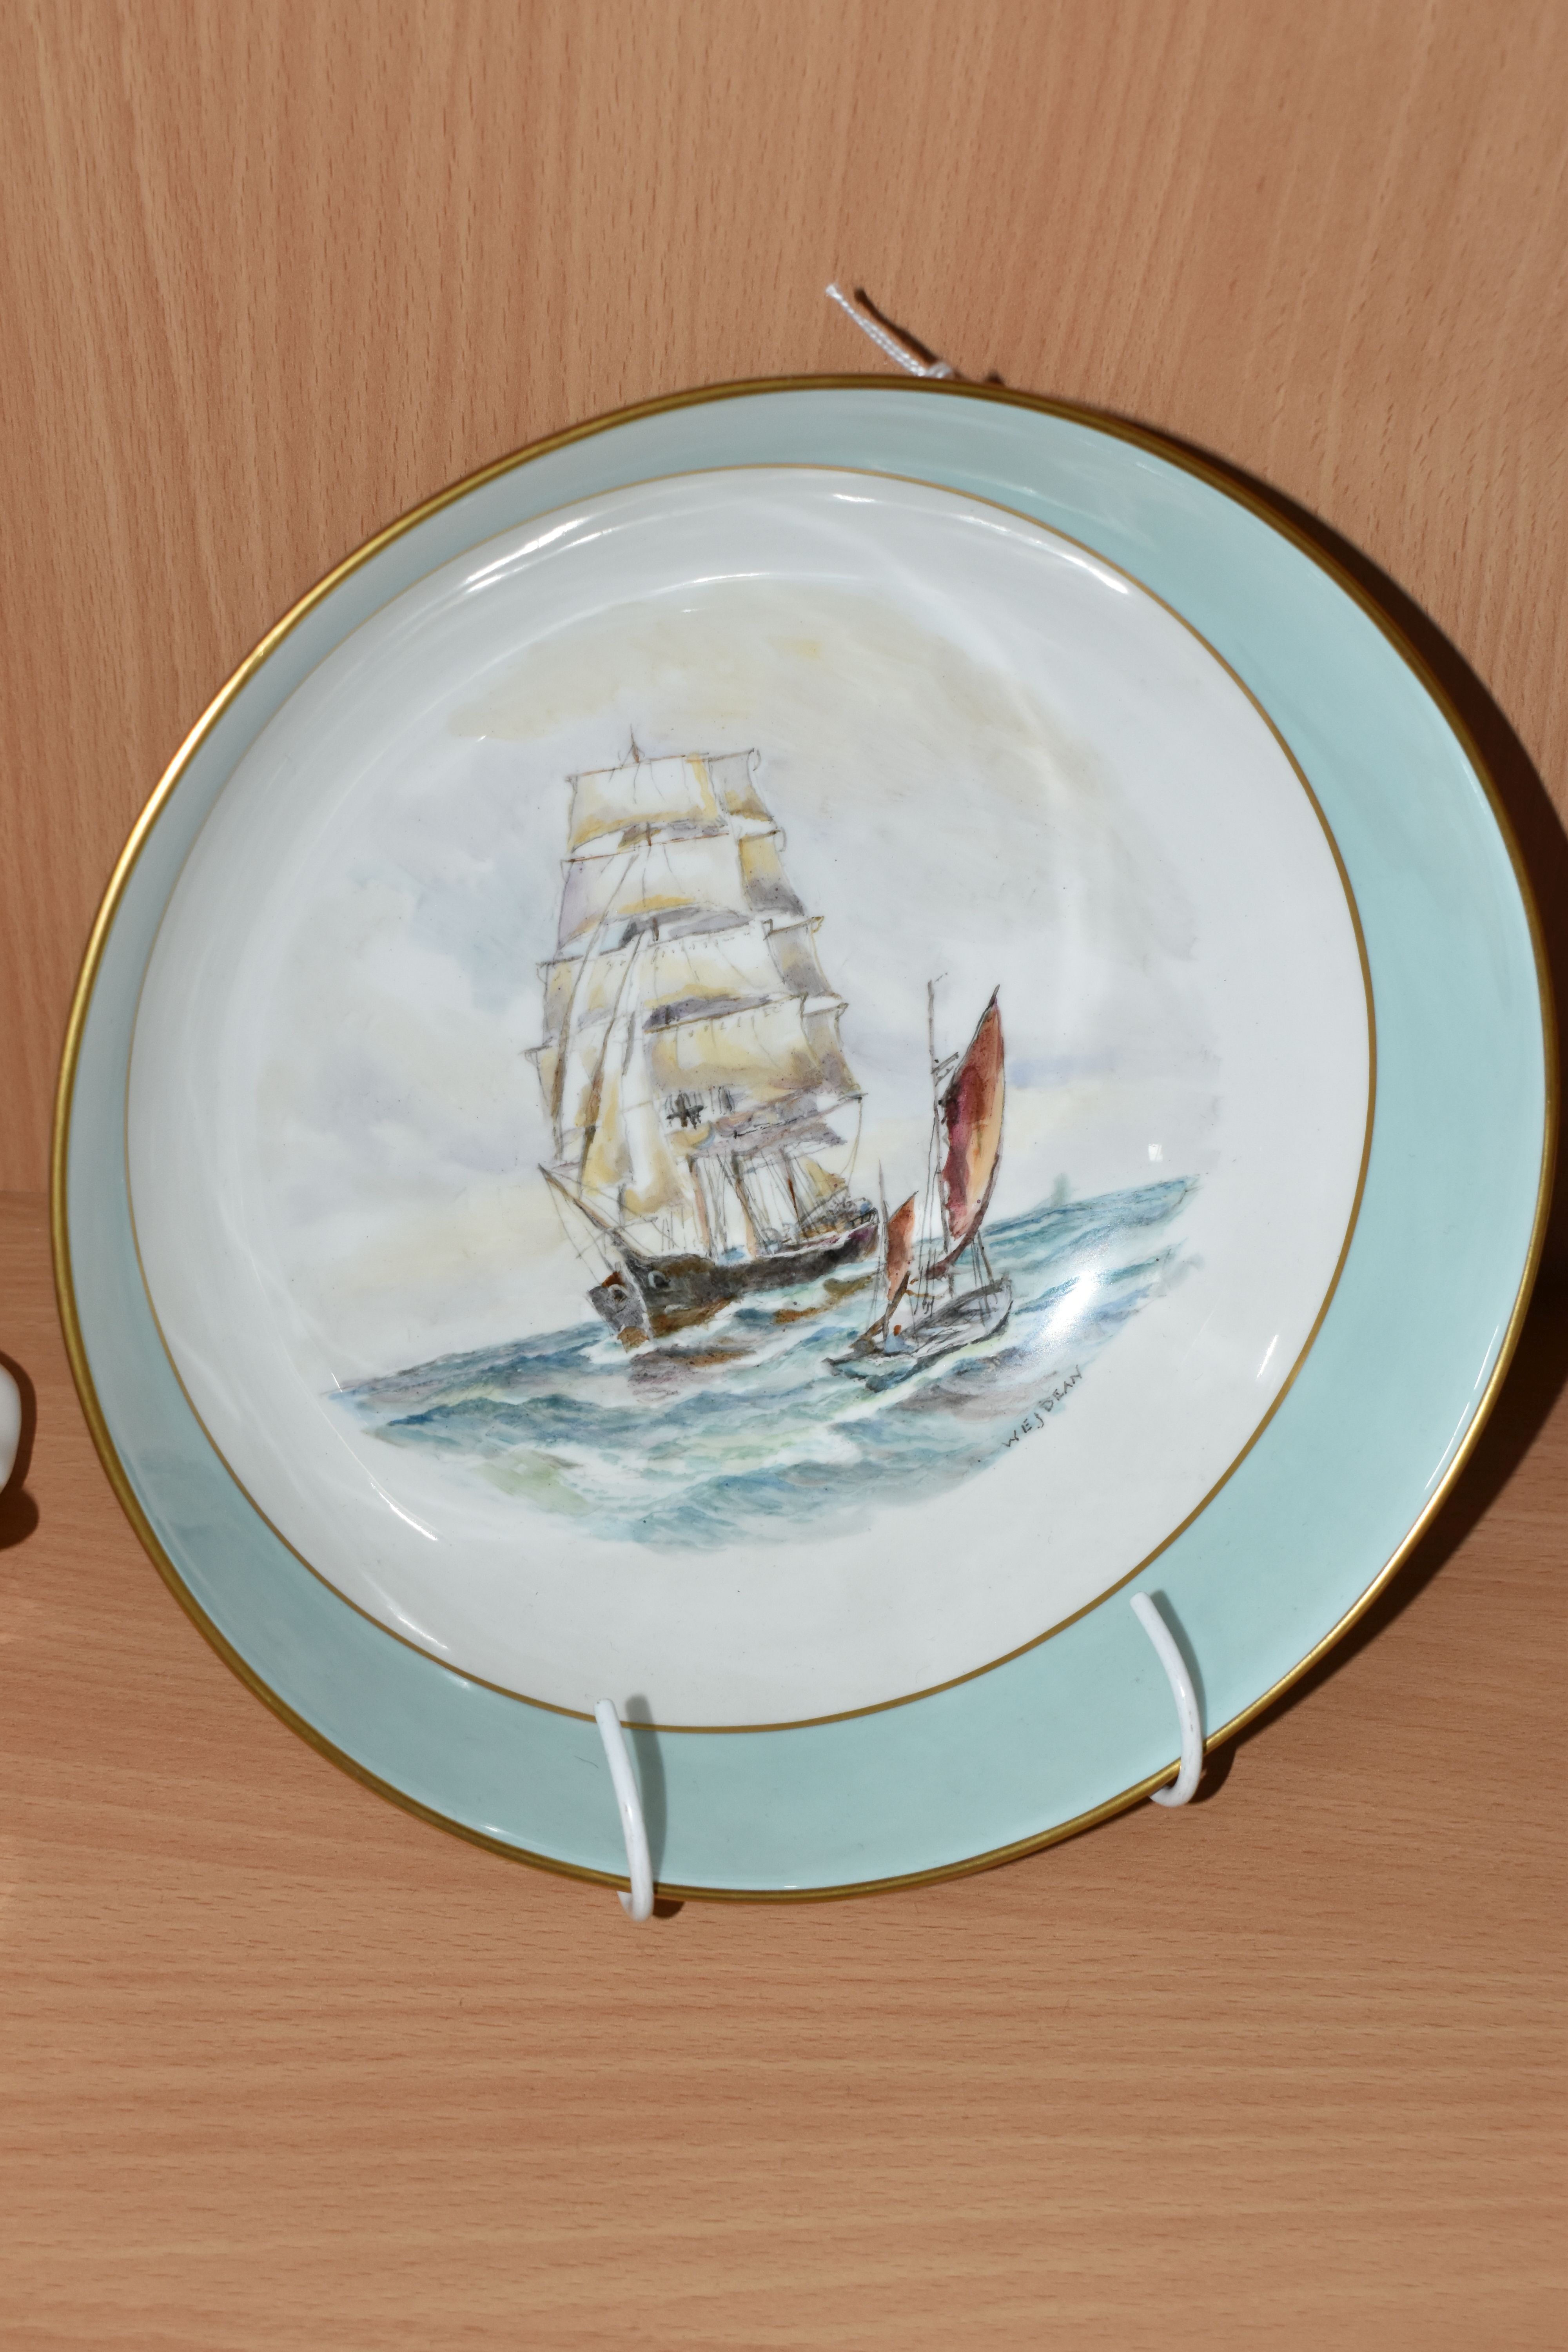 A ROYAL CROWN DERBY FRUIT BOWL BY W E J DEAN, hand painted with nautical scenes of sailing ships and